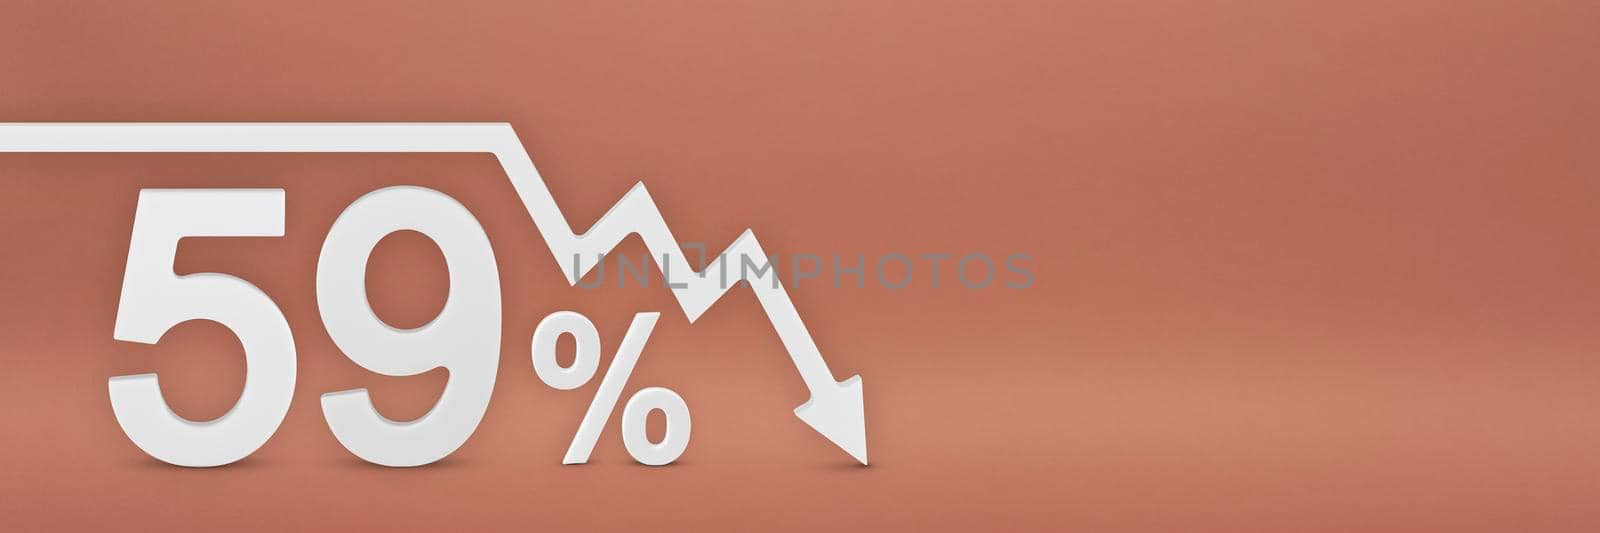 fifty-nine percent, the arrow on the graph is pointing down. Stock market crash, bear market, inflation.Economic collapse, collapse of stocks.3d banner,59 percent discount sign on a red background